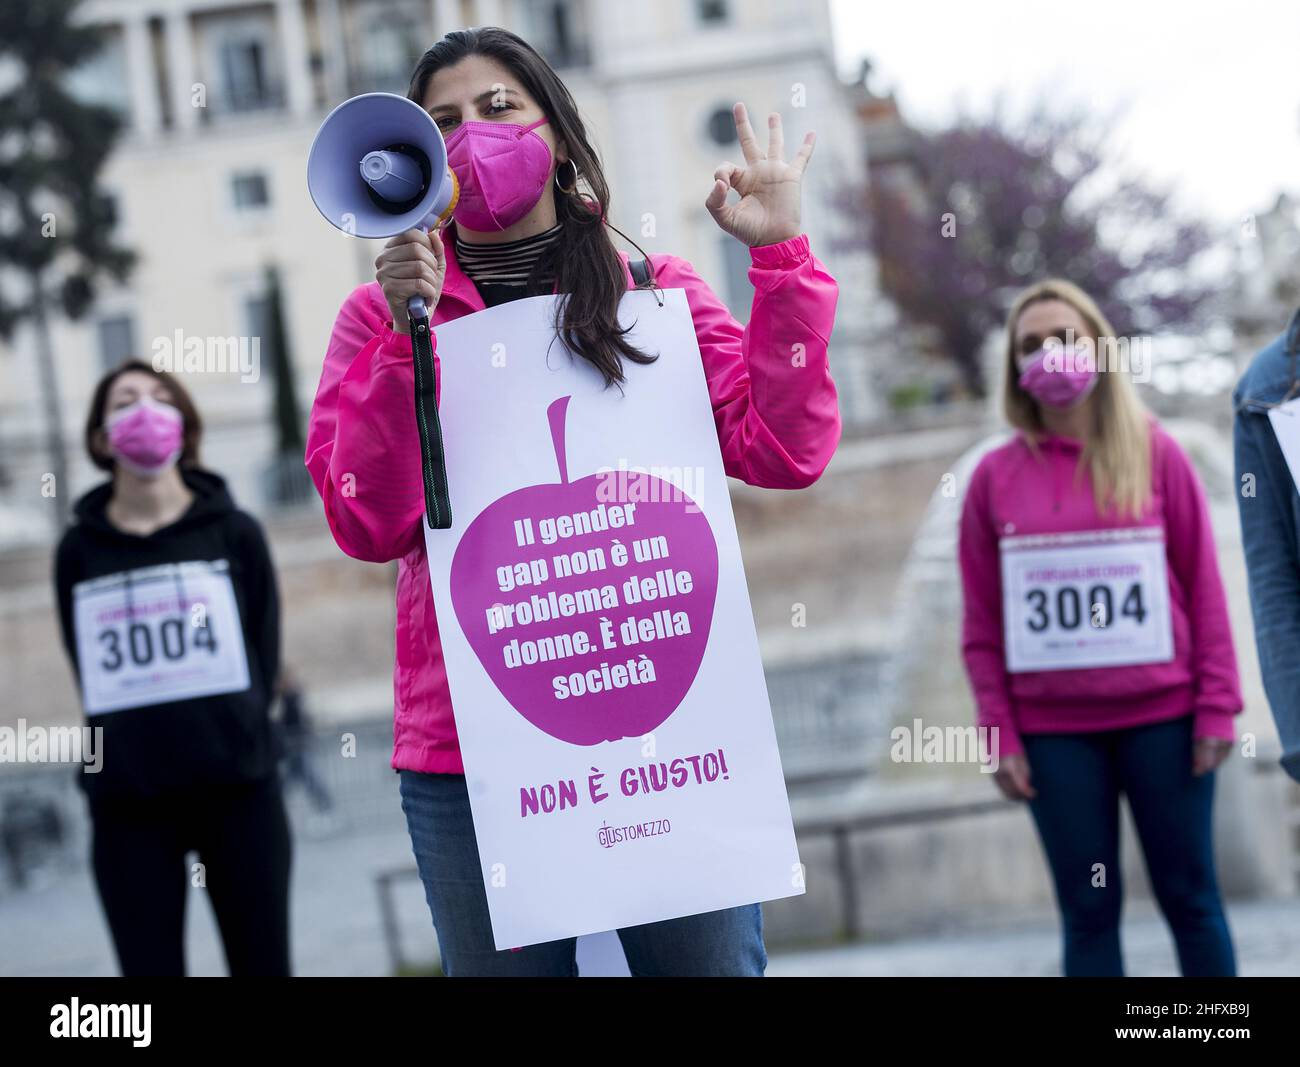 Roberto Monaldo / LaPresse 18-04-2021 Rome (Italy) #CorsaAlRecovery - Flash mob against gender disparity In the pic A moment of the flash mob Stock Photo